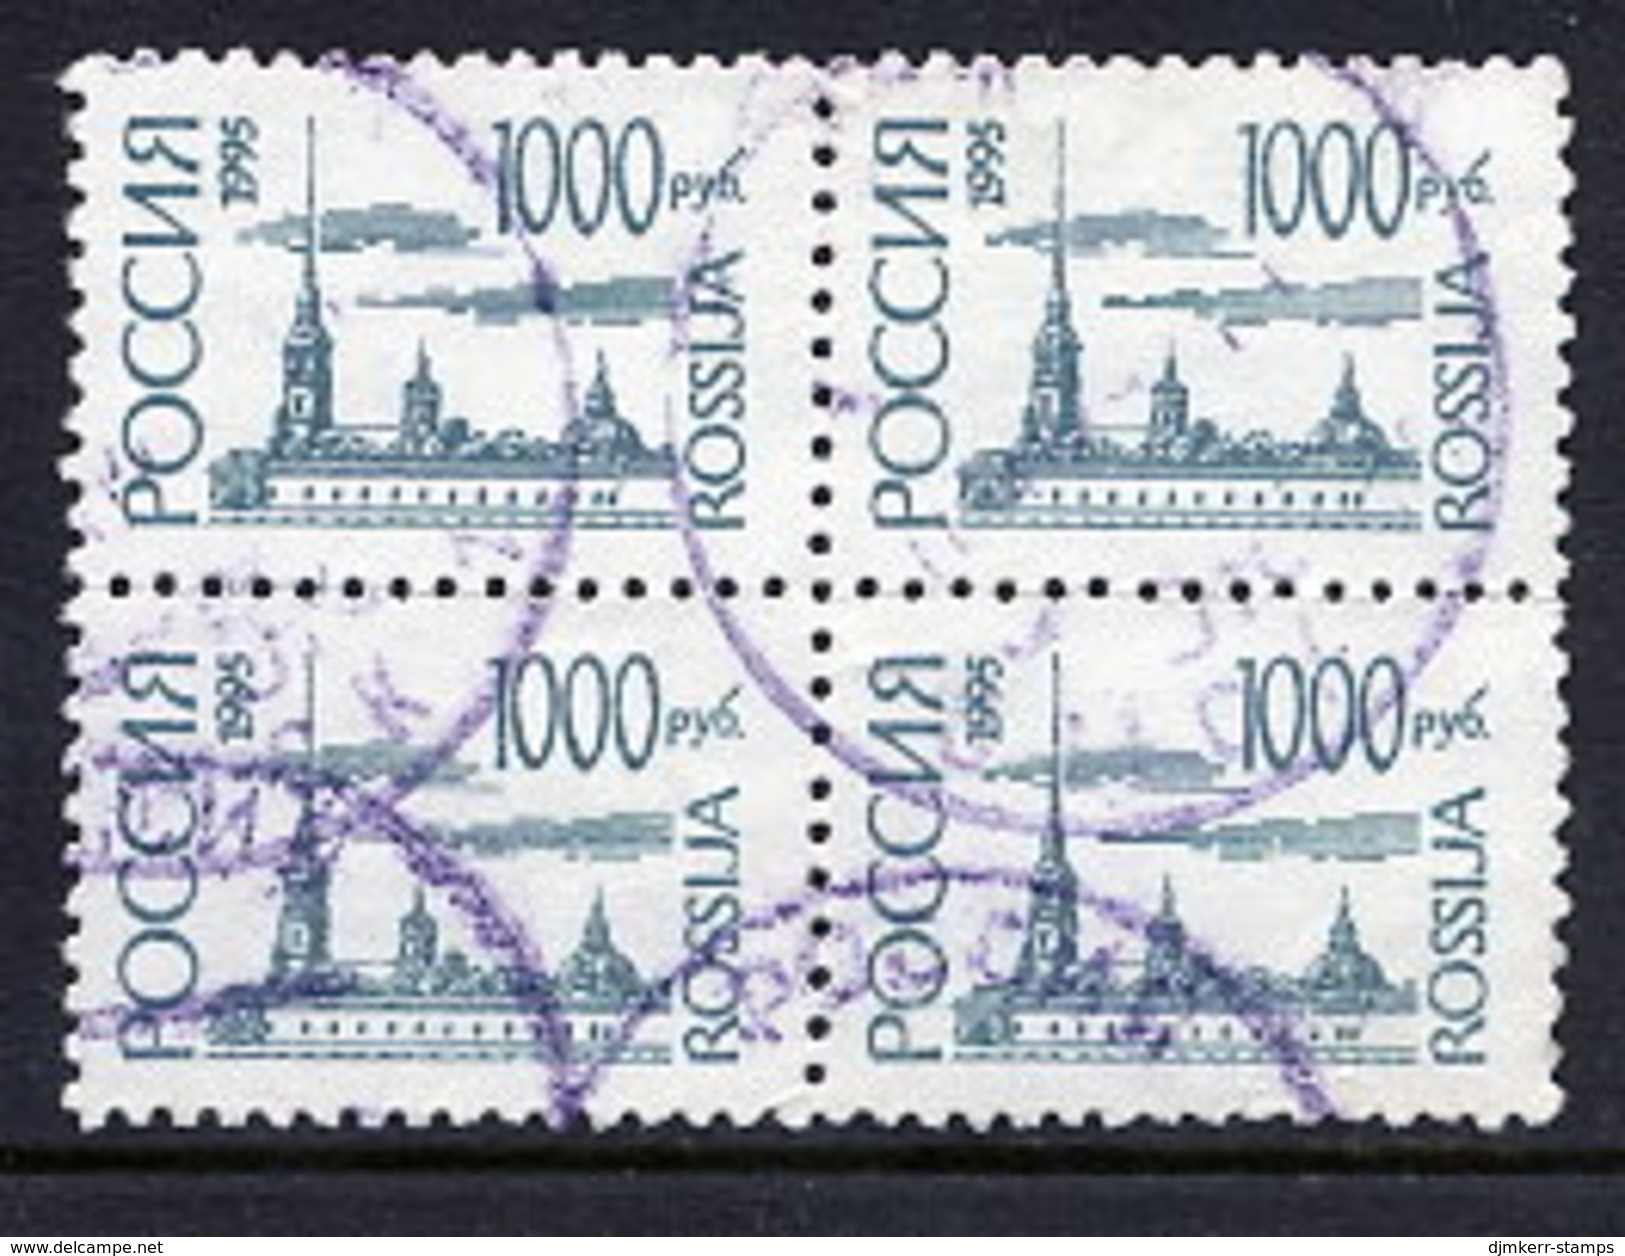 RUSSIAN FEDERATION 1995 Buildings Definitive 1000 R.  On Ordinary  Paper Block Of 4 Used.  Michel 414w - Used Stamps